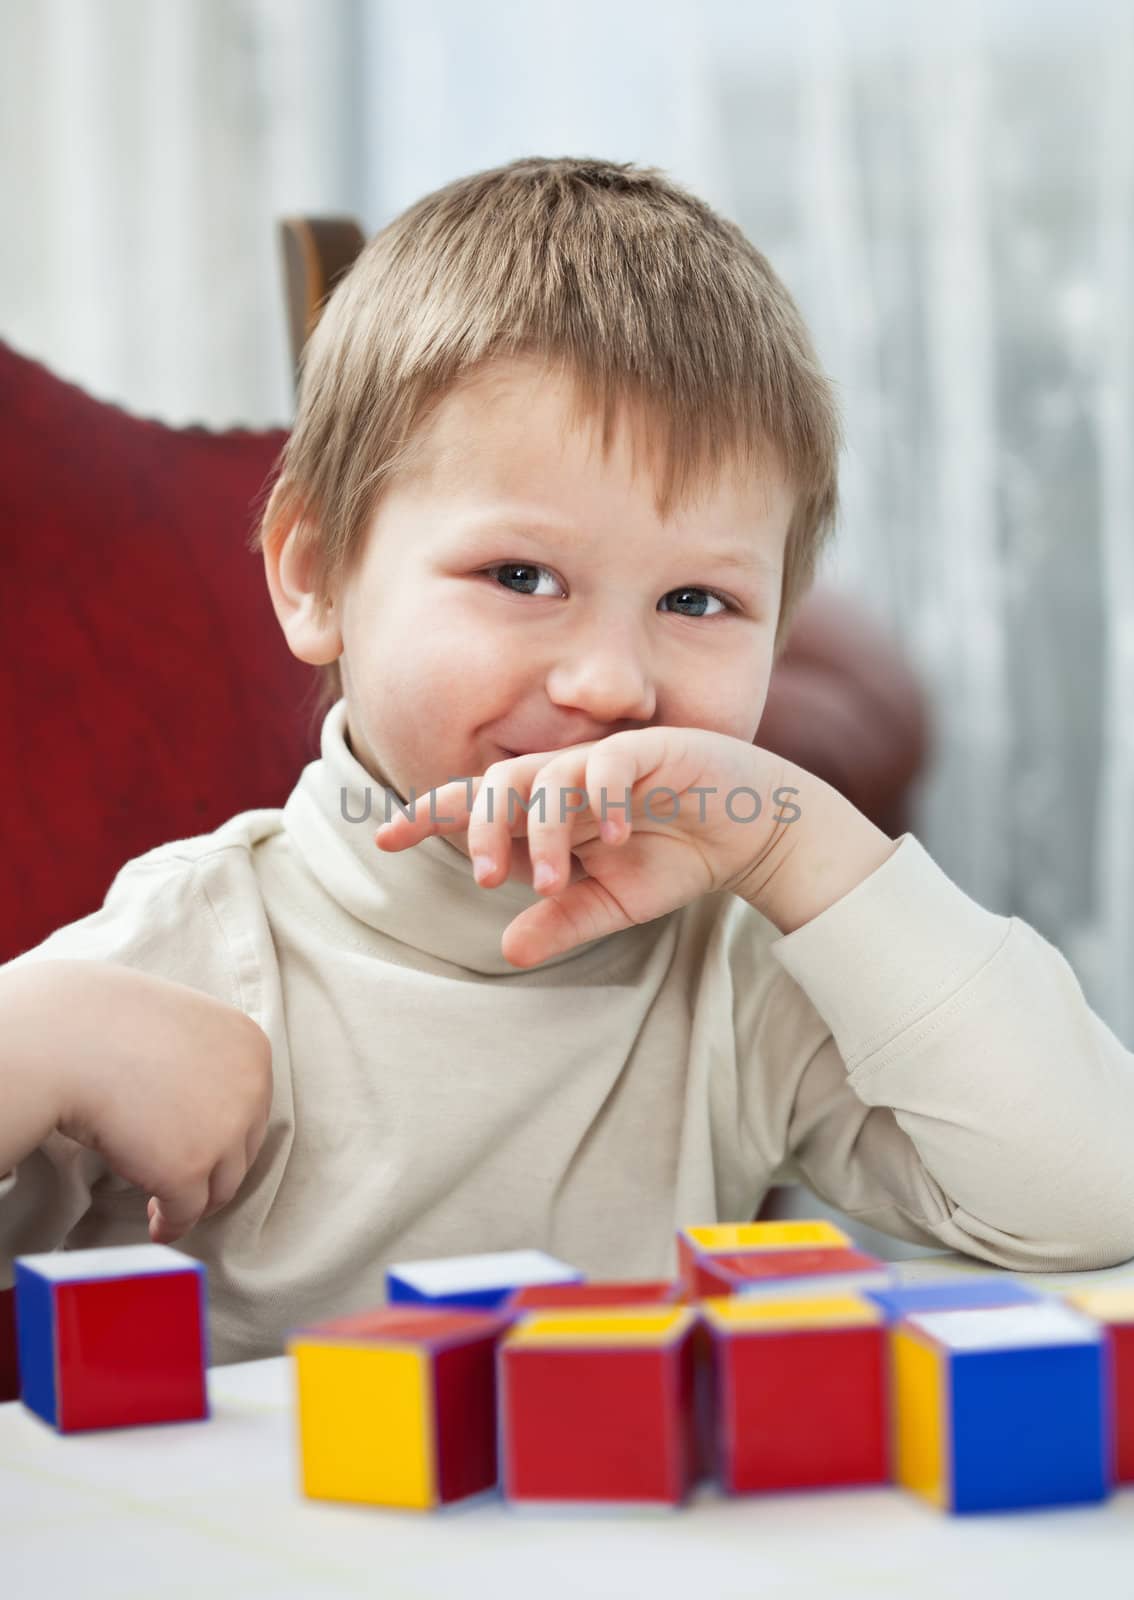 Smiling blond boy seating at the table with colorful blocks